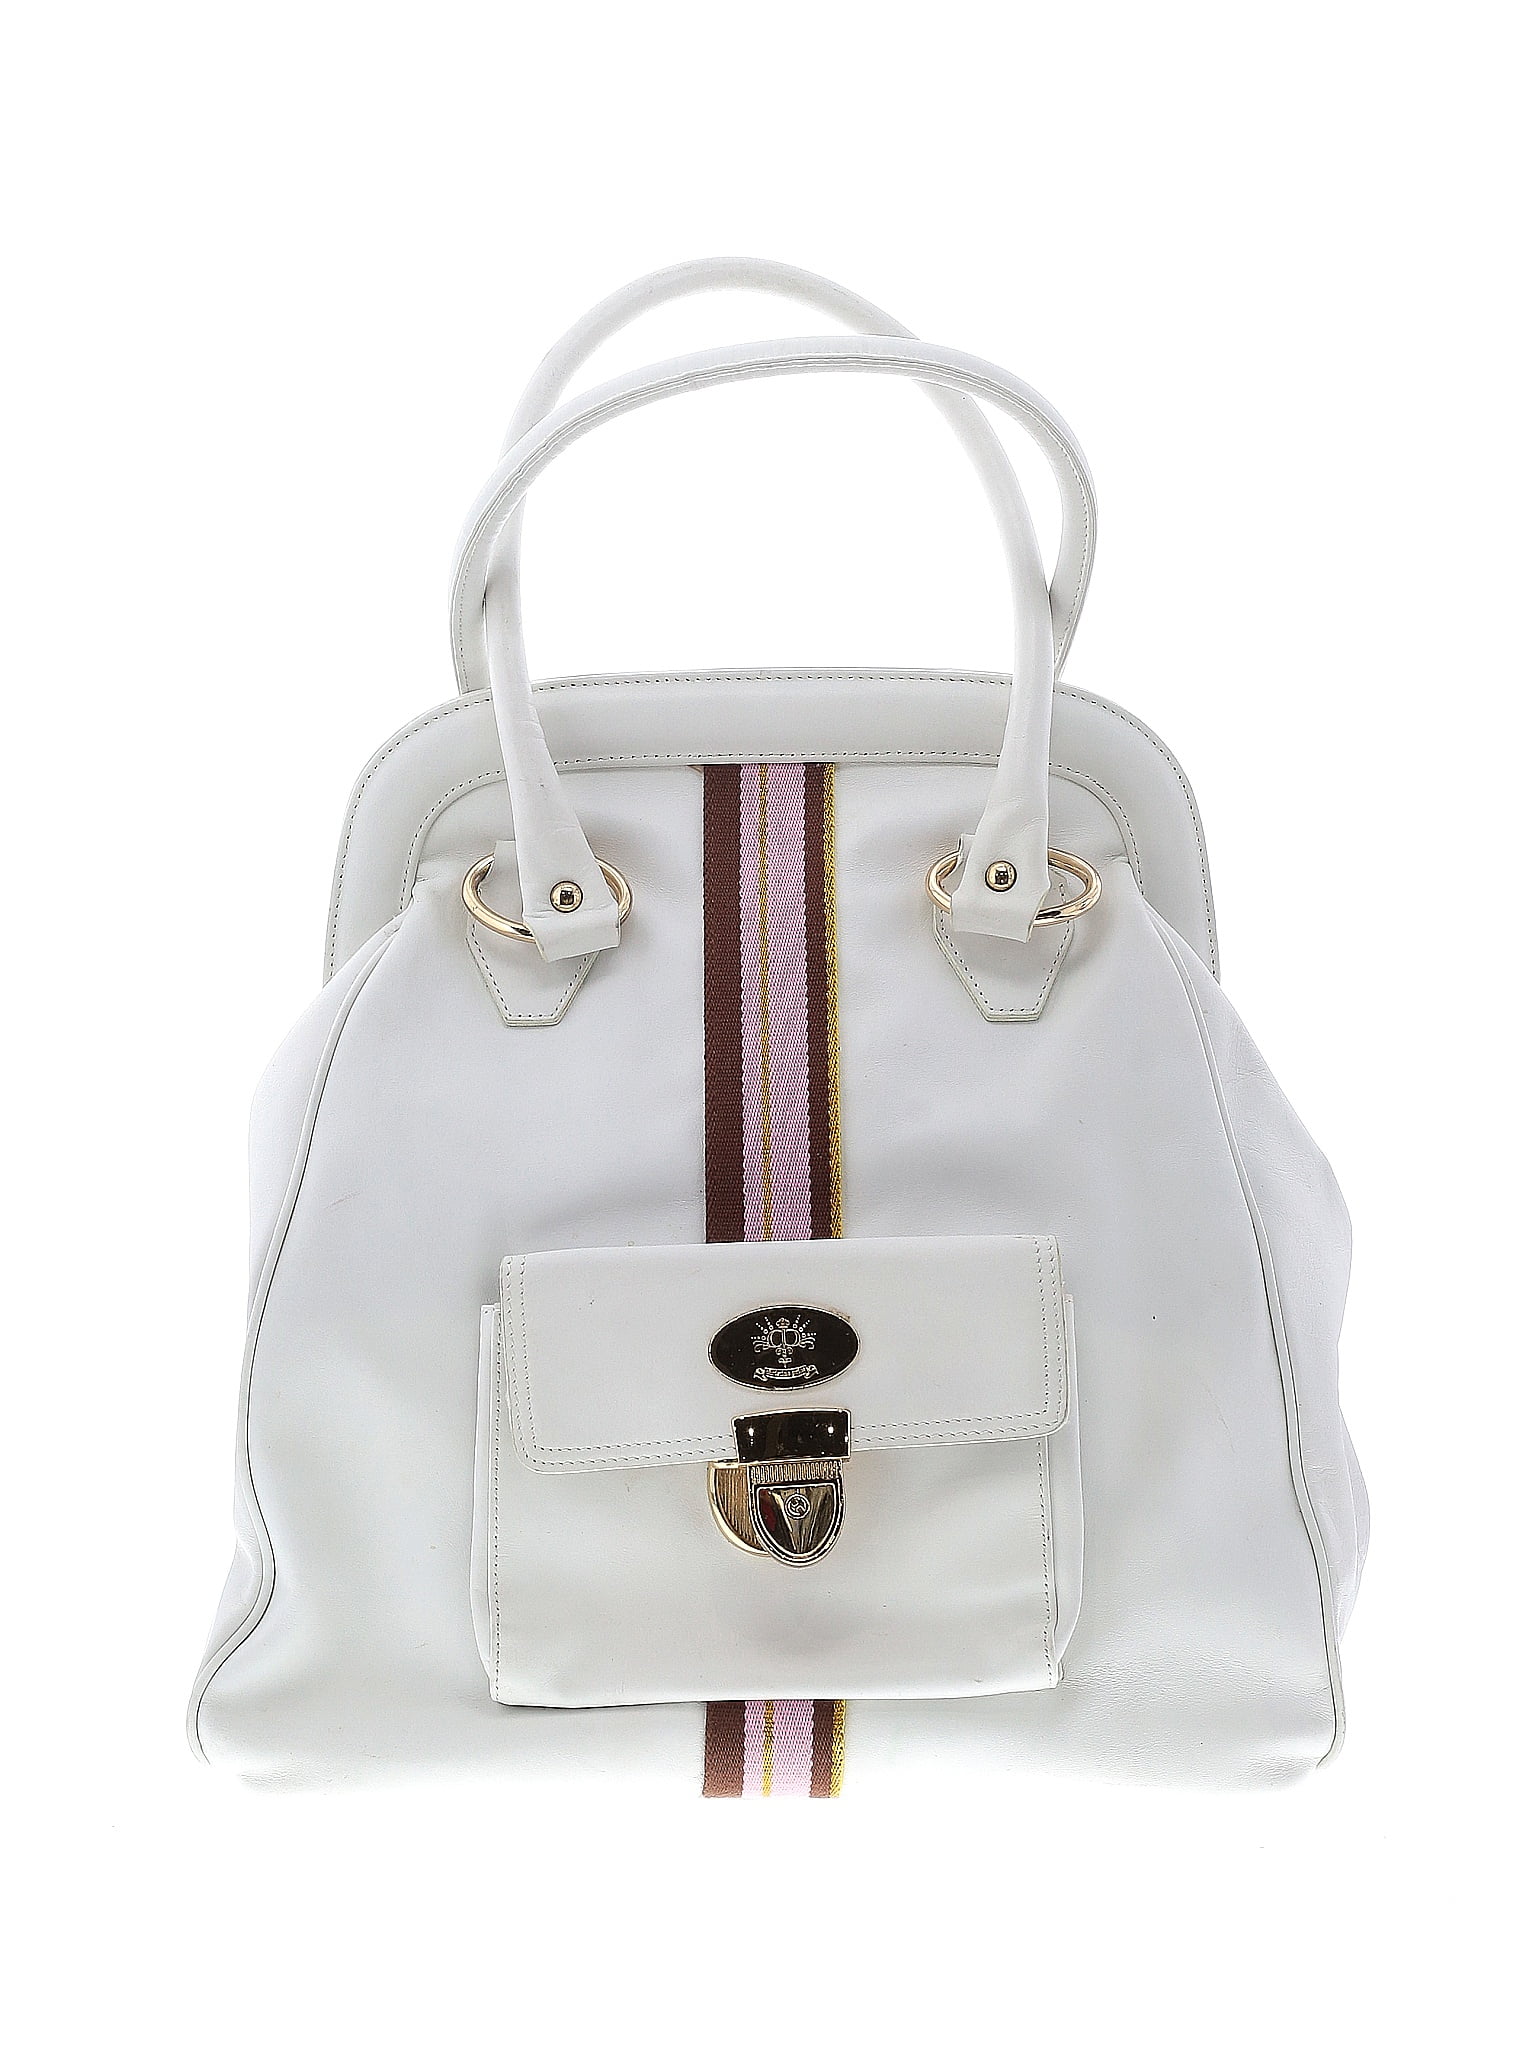 Christine Price Bag In Women's Bags & Handbags for sale